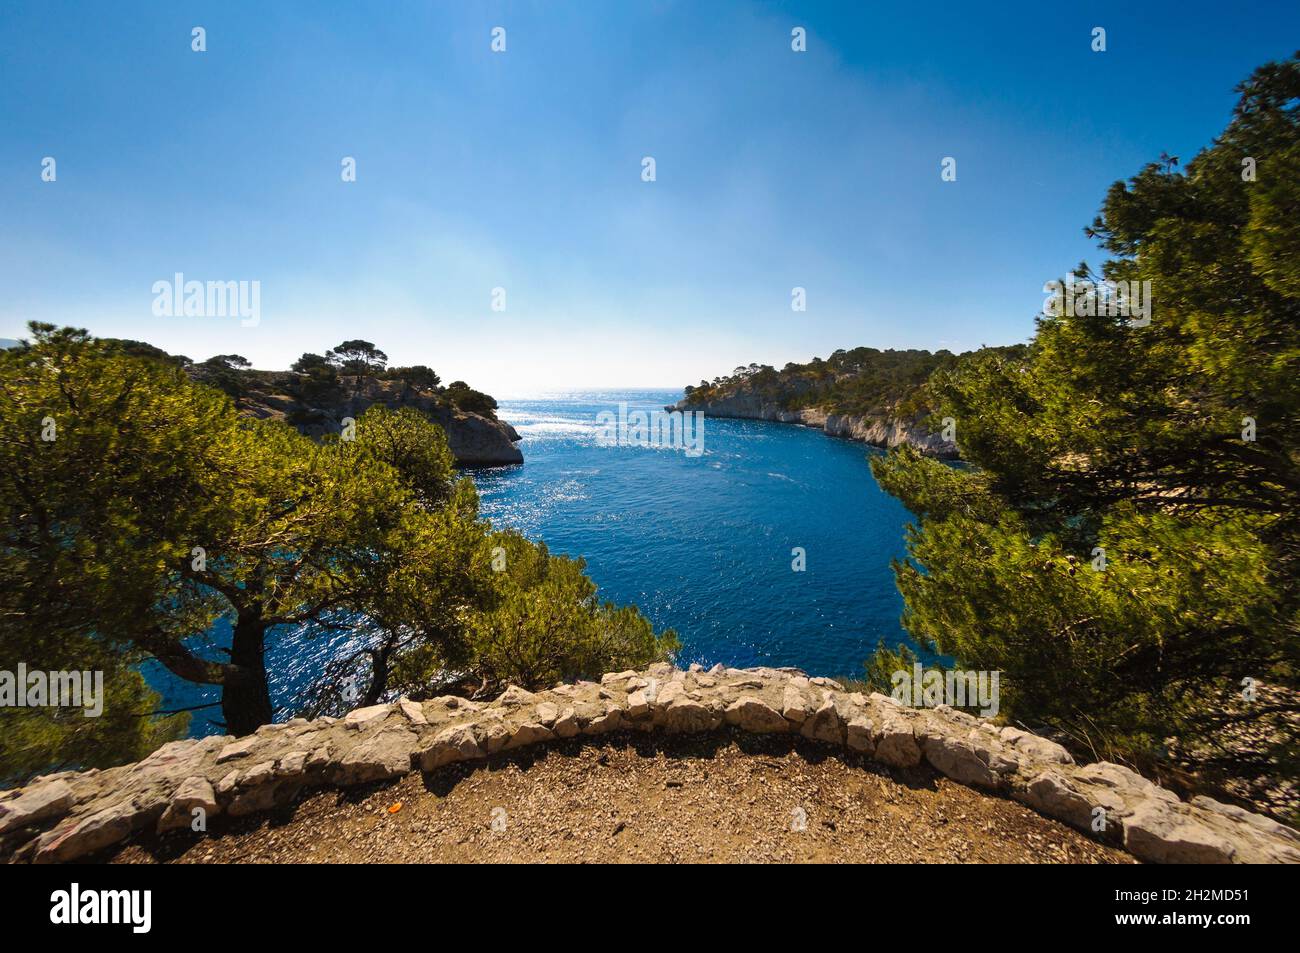 Arbor of Port Miou at Cassis city in France Stock Photo